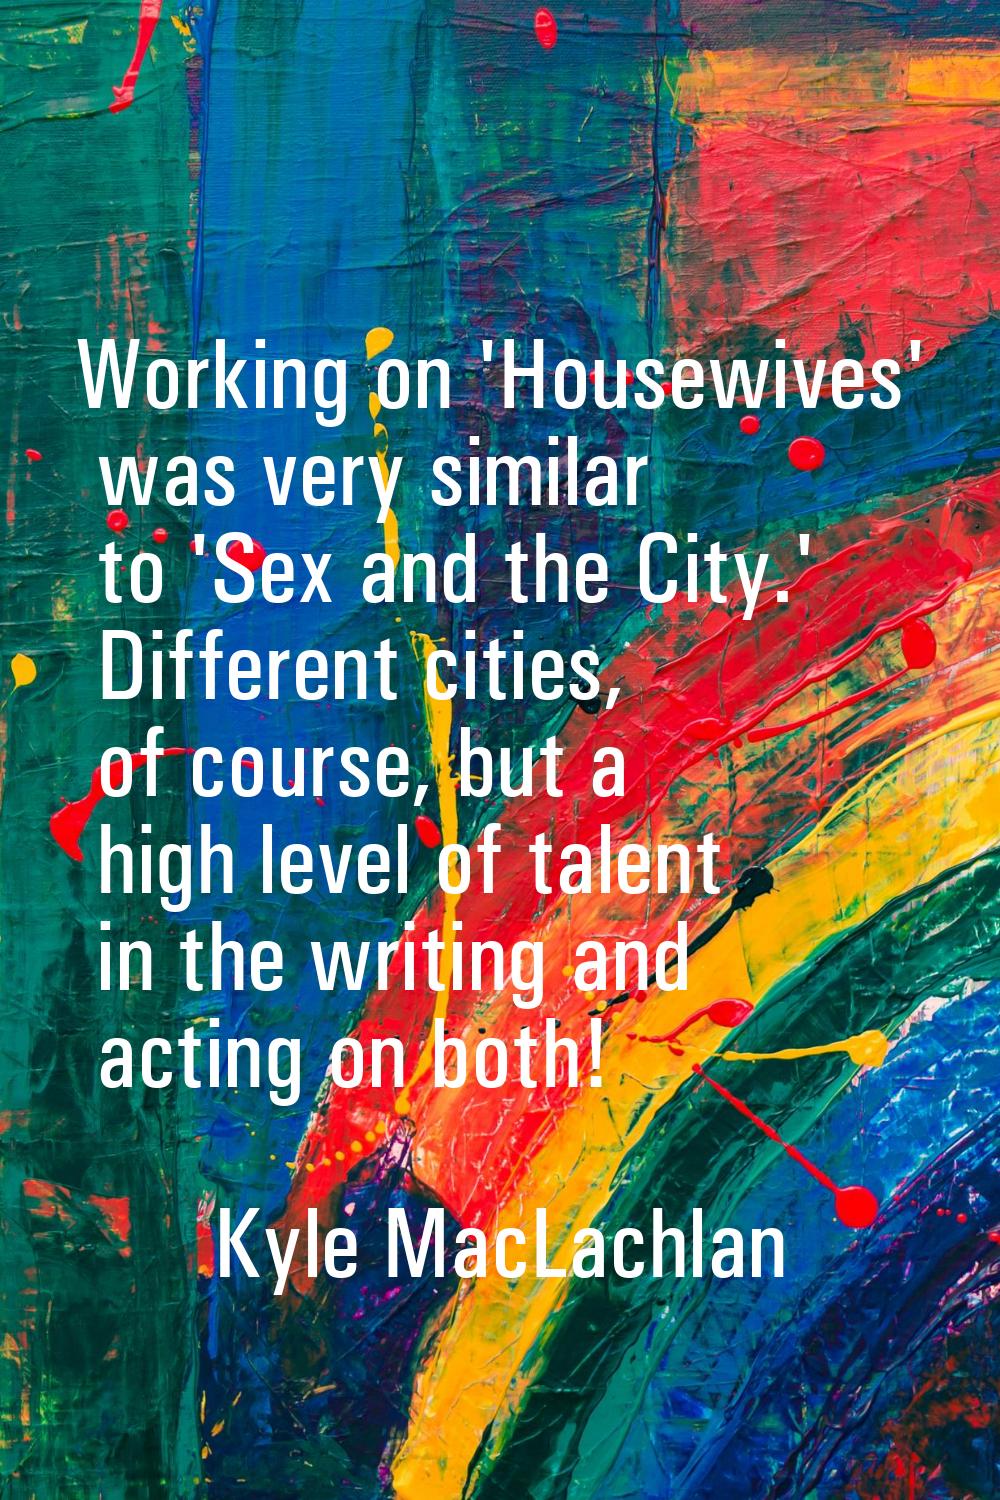 Working on 'Housewives' was very similar to 'Sex and the City.' Different cities, of course, but a 